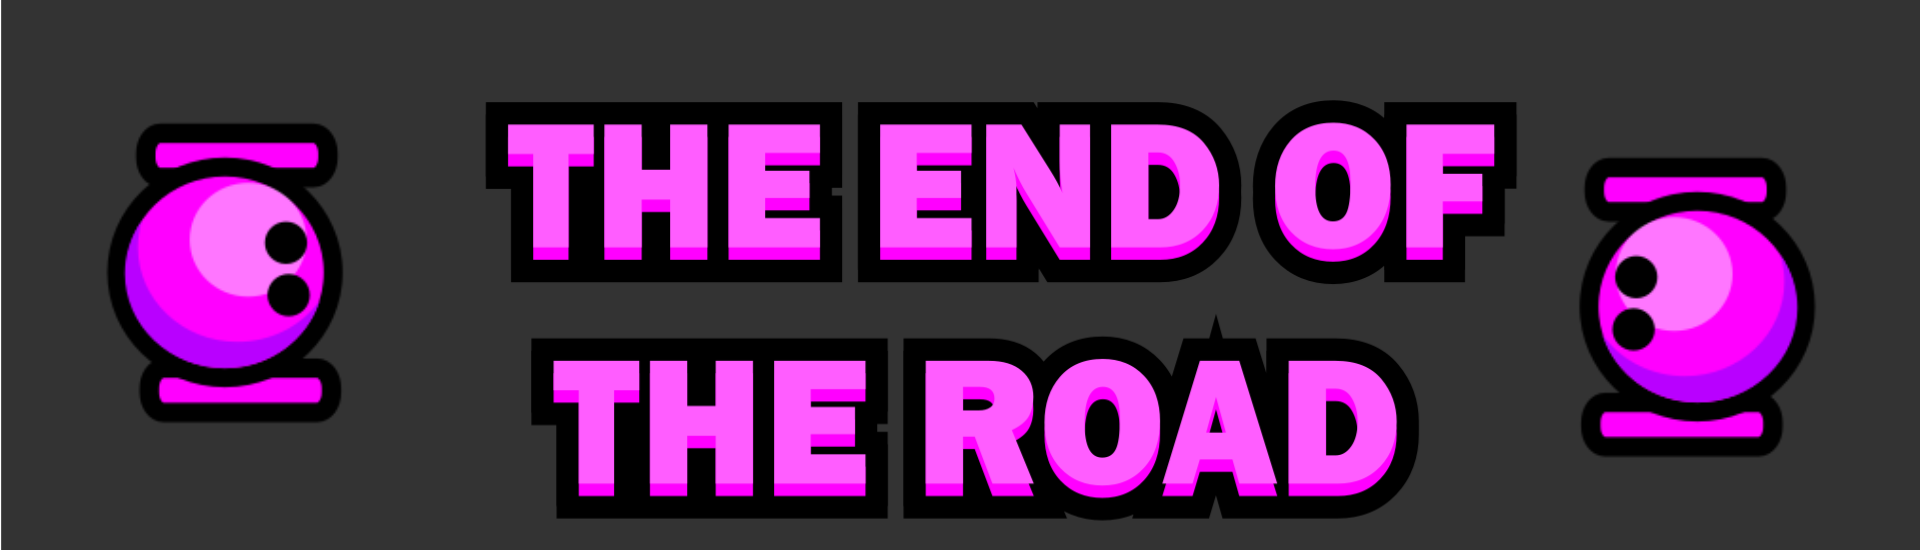 The End of The Road (full release)